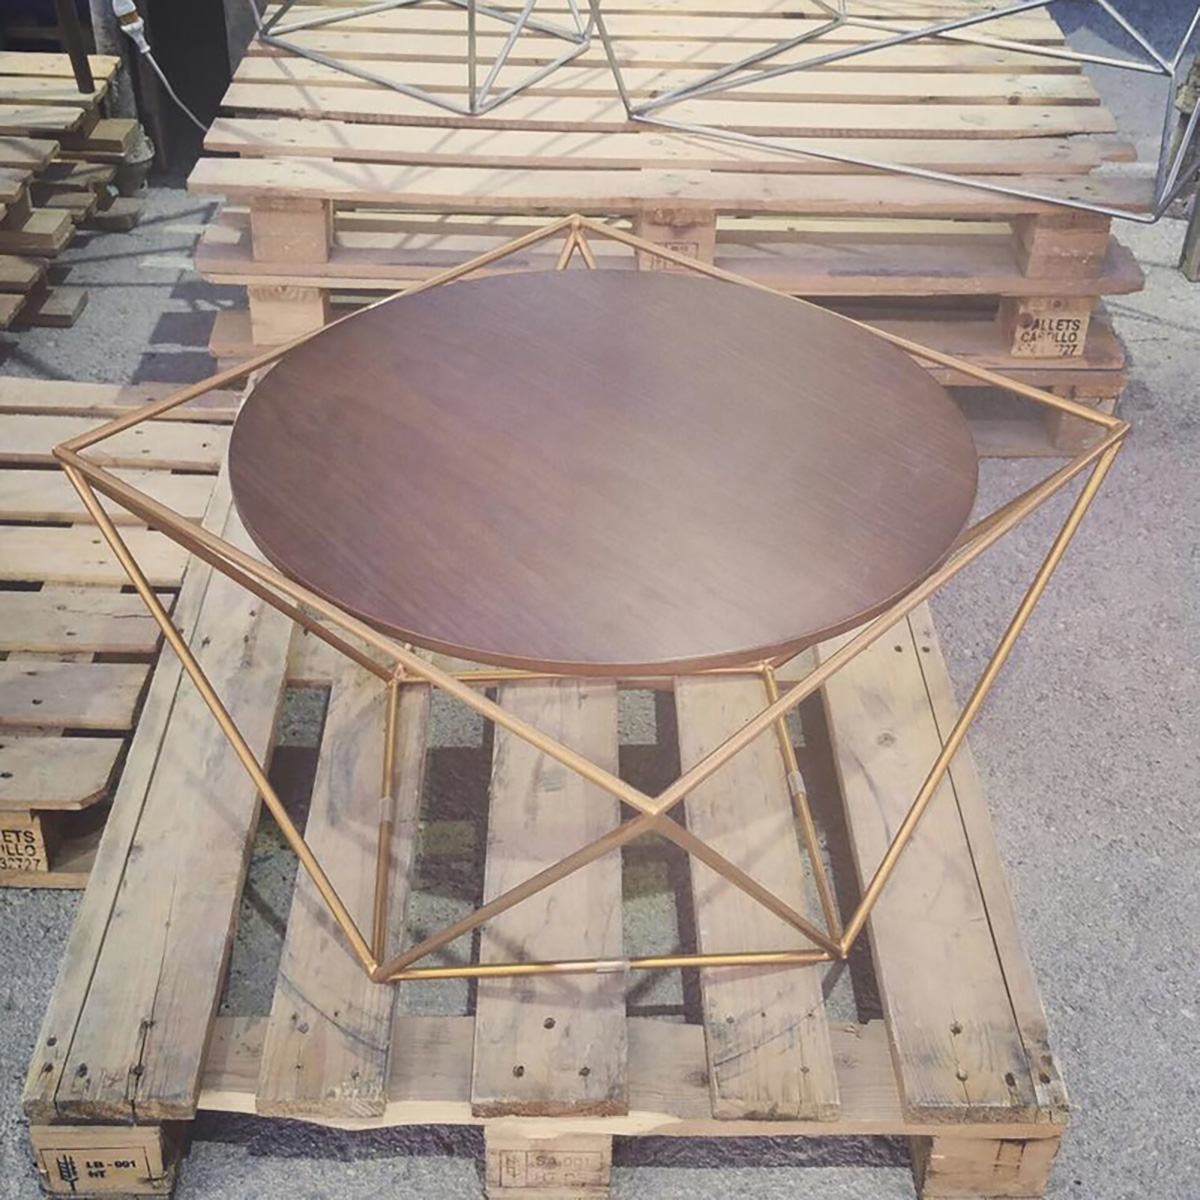 Previous work: Coffee Table - Geometrical square coffee table with top walnut veneer